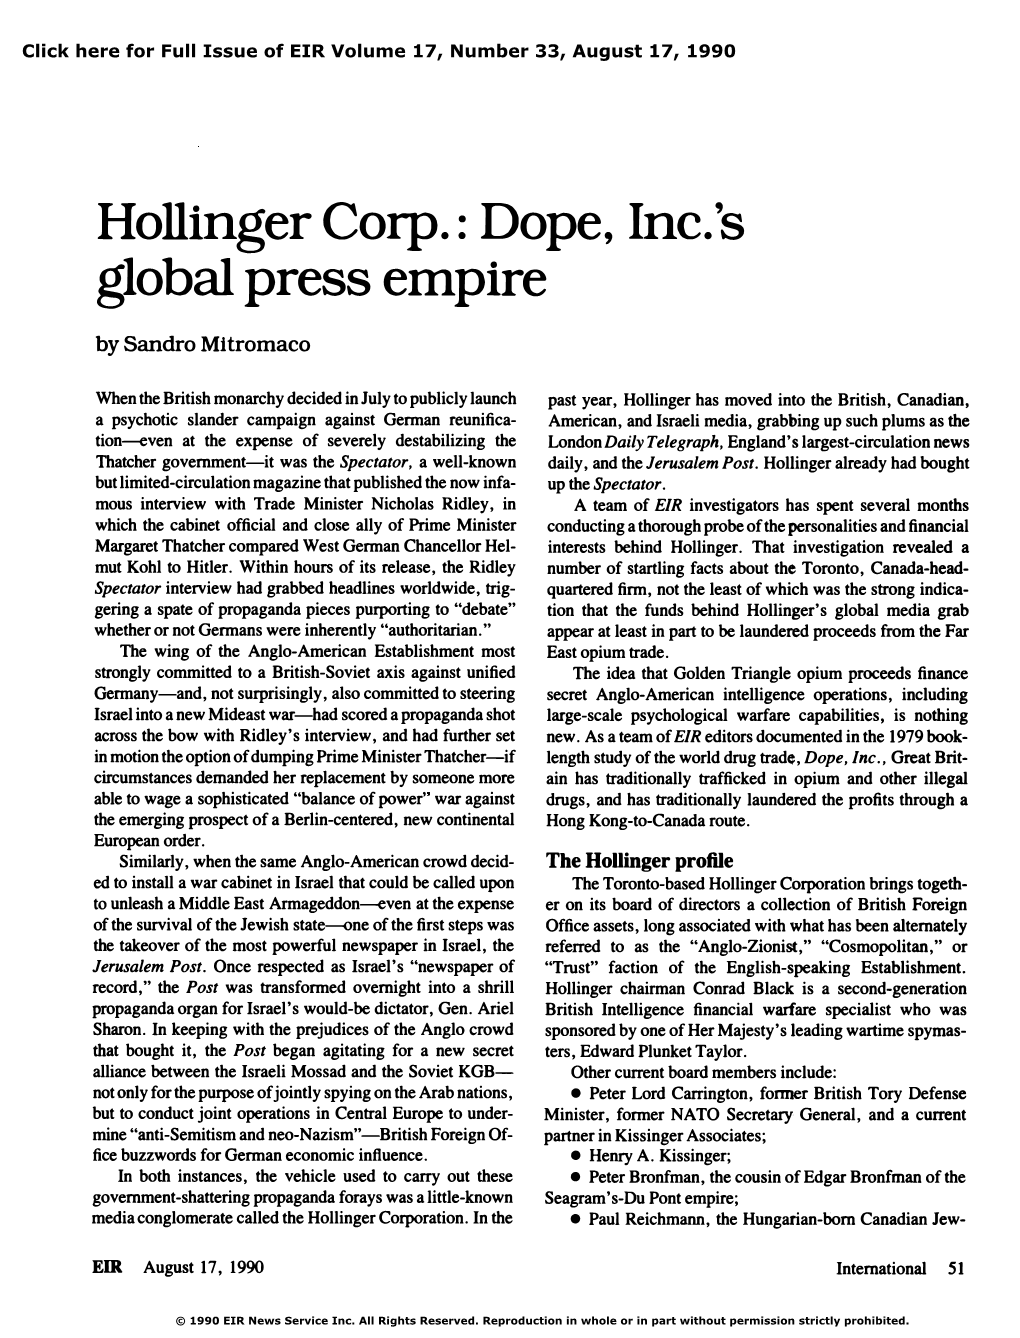 Hollinger Corp.: Dope, Inc.'S Global Press Empire